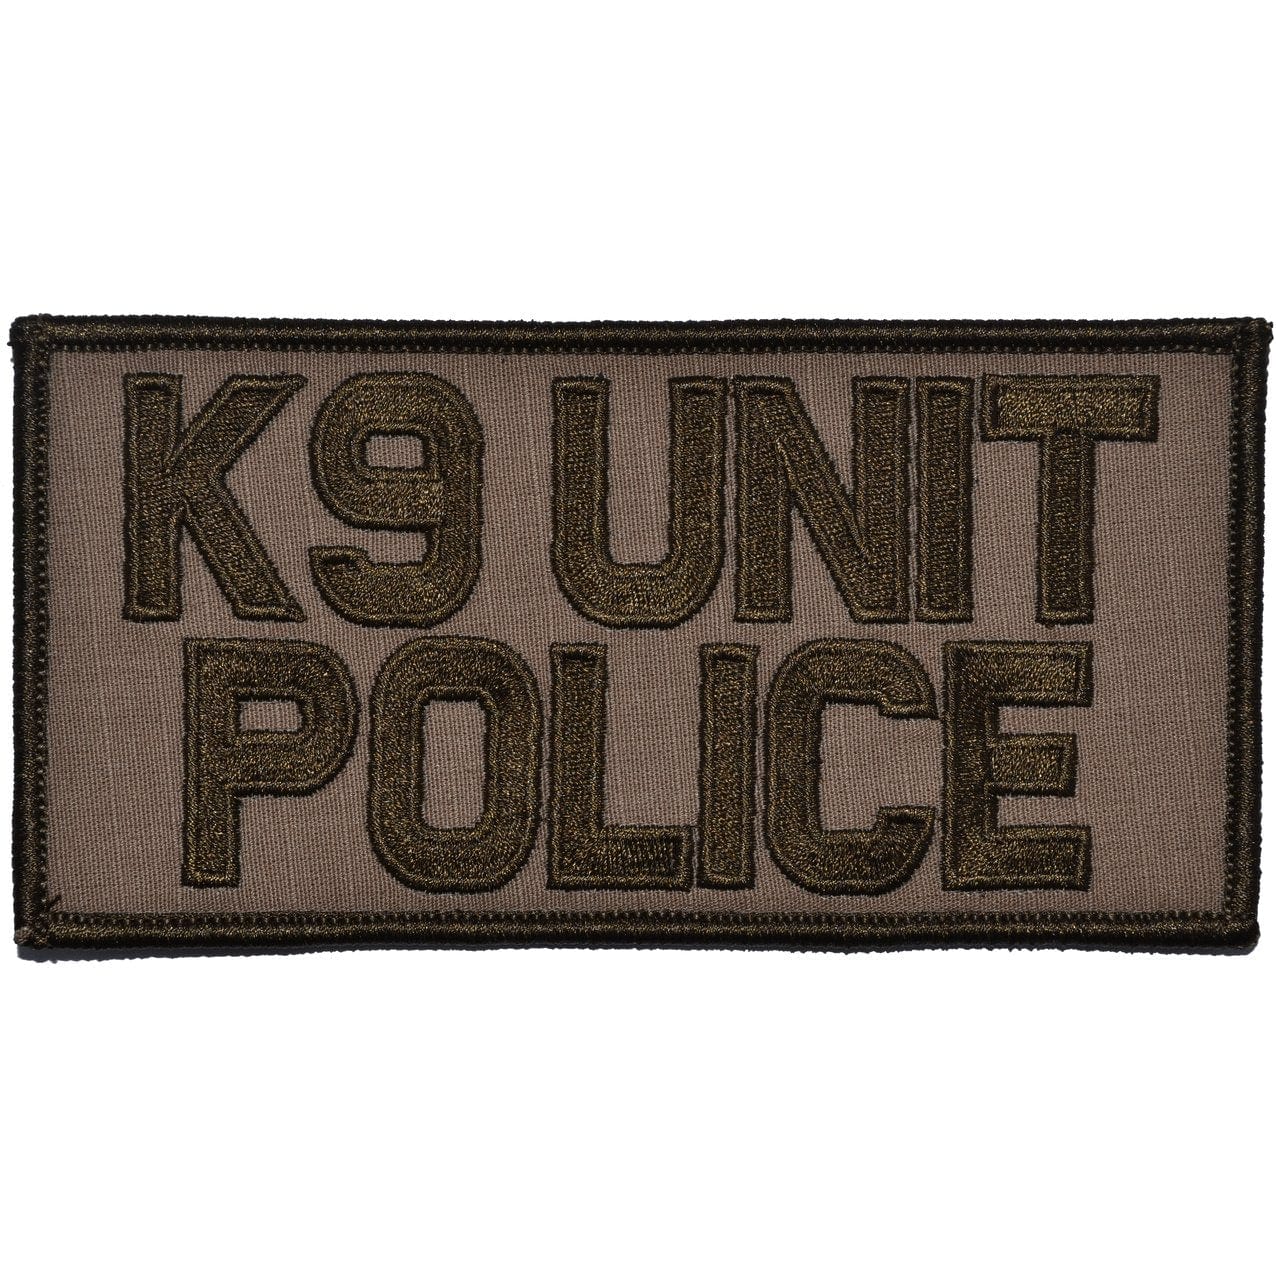 Sheriff K9 Vest Patch for Plate Carrier - 3X10 and 2X6 inches Sheriff  Patches with Hook for Tactical Vest Jacket Clothing Uniform Cap Backpack 